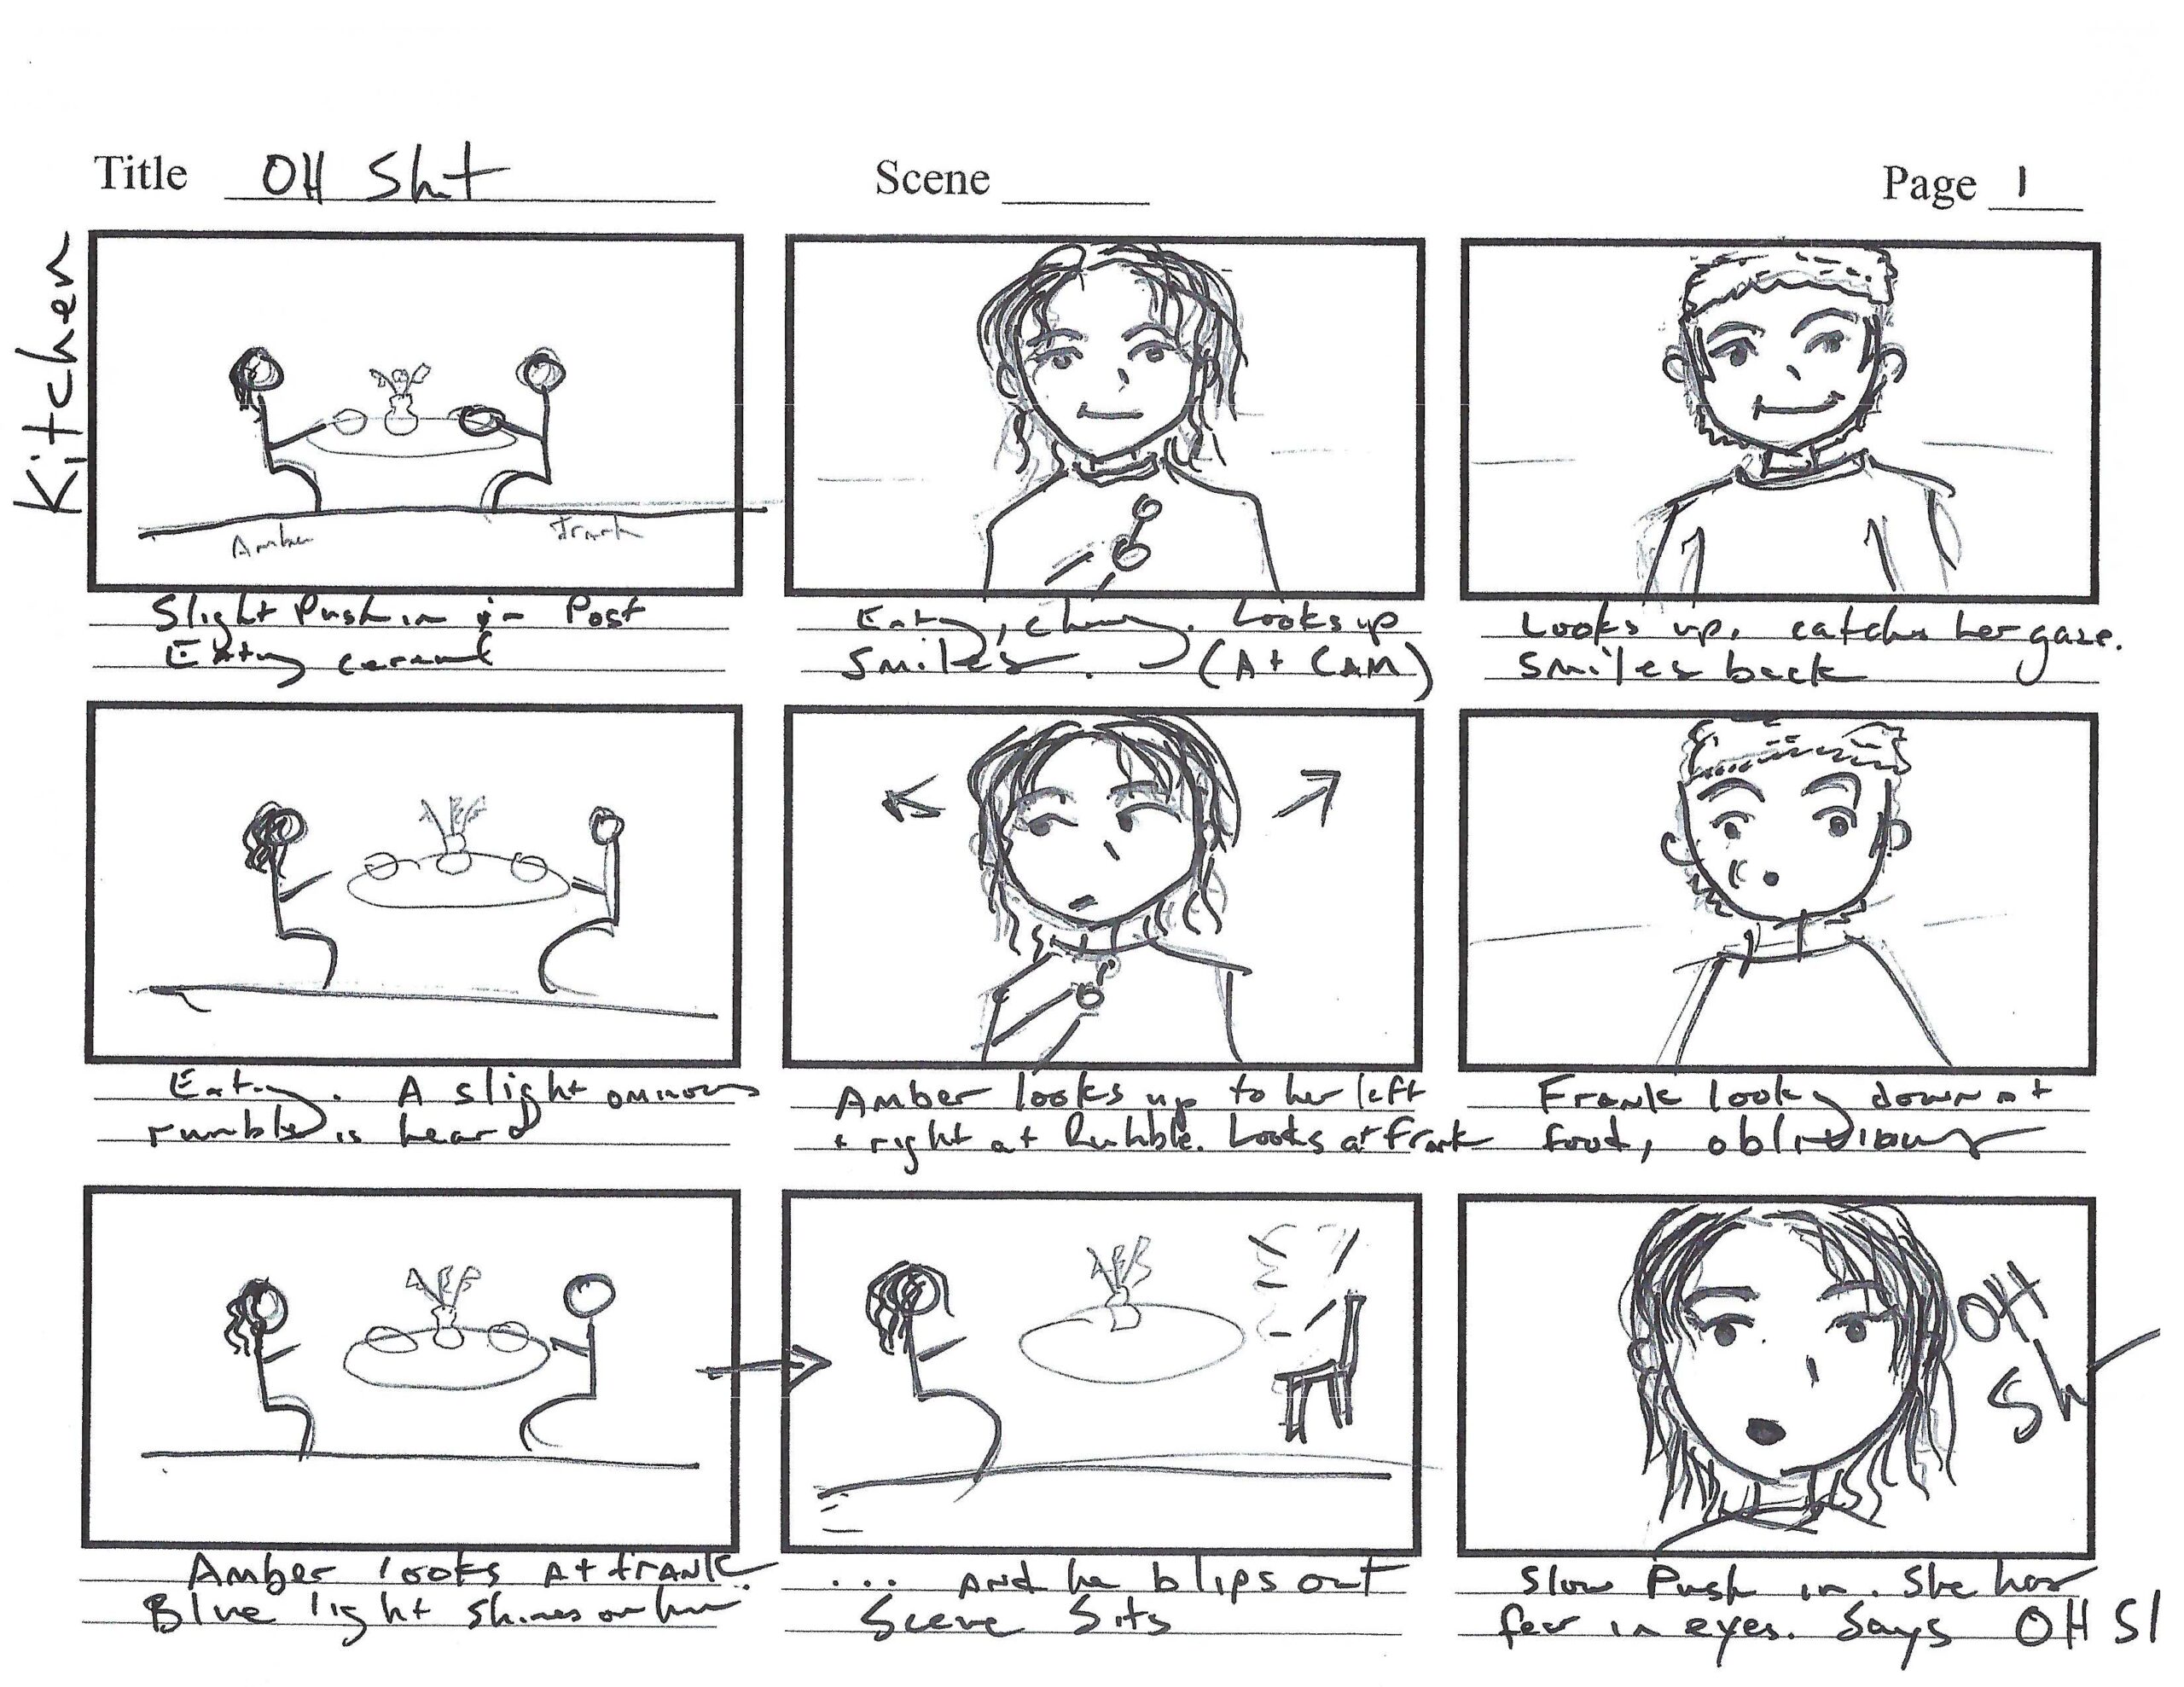 OhShitStoryboards_Page_1